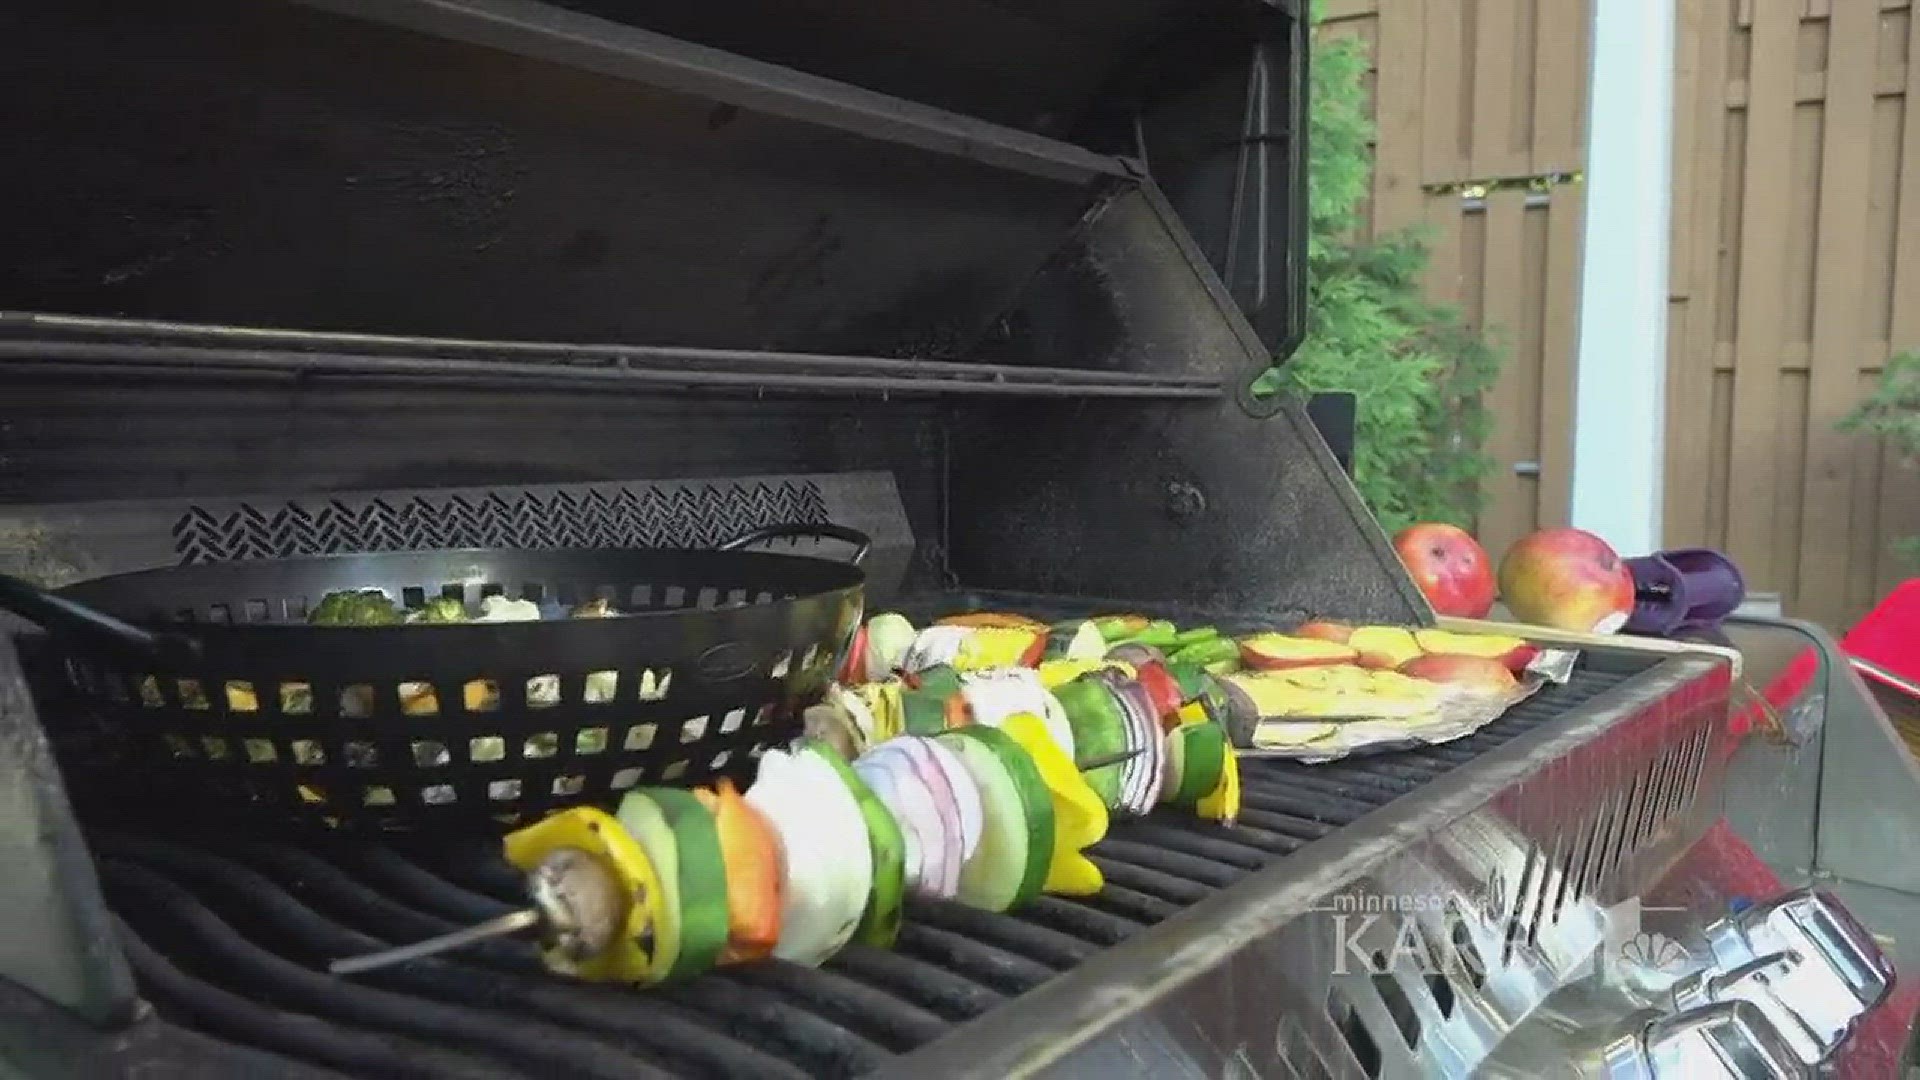 Motivation Monday: Meatless on the grill